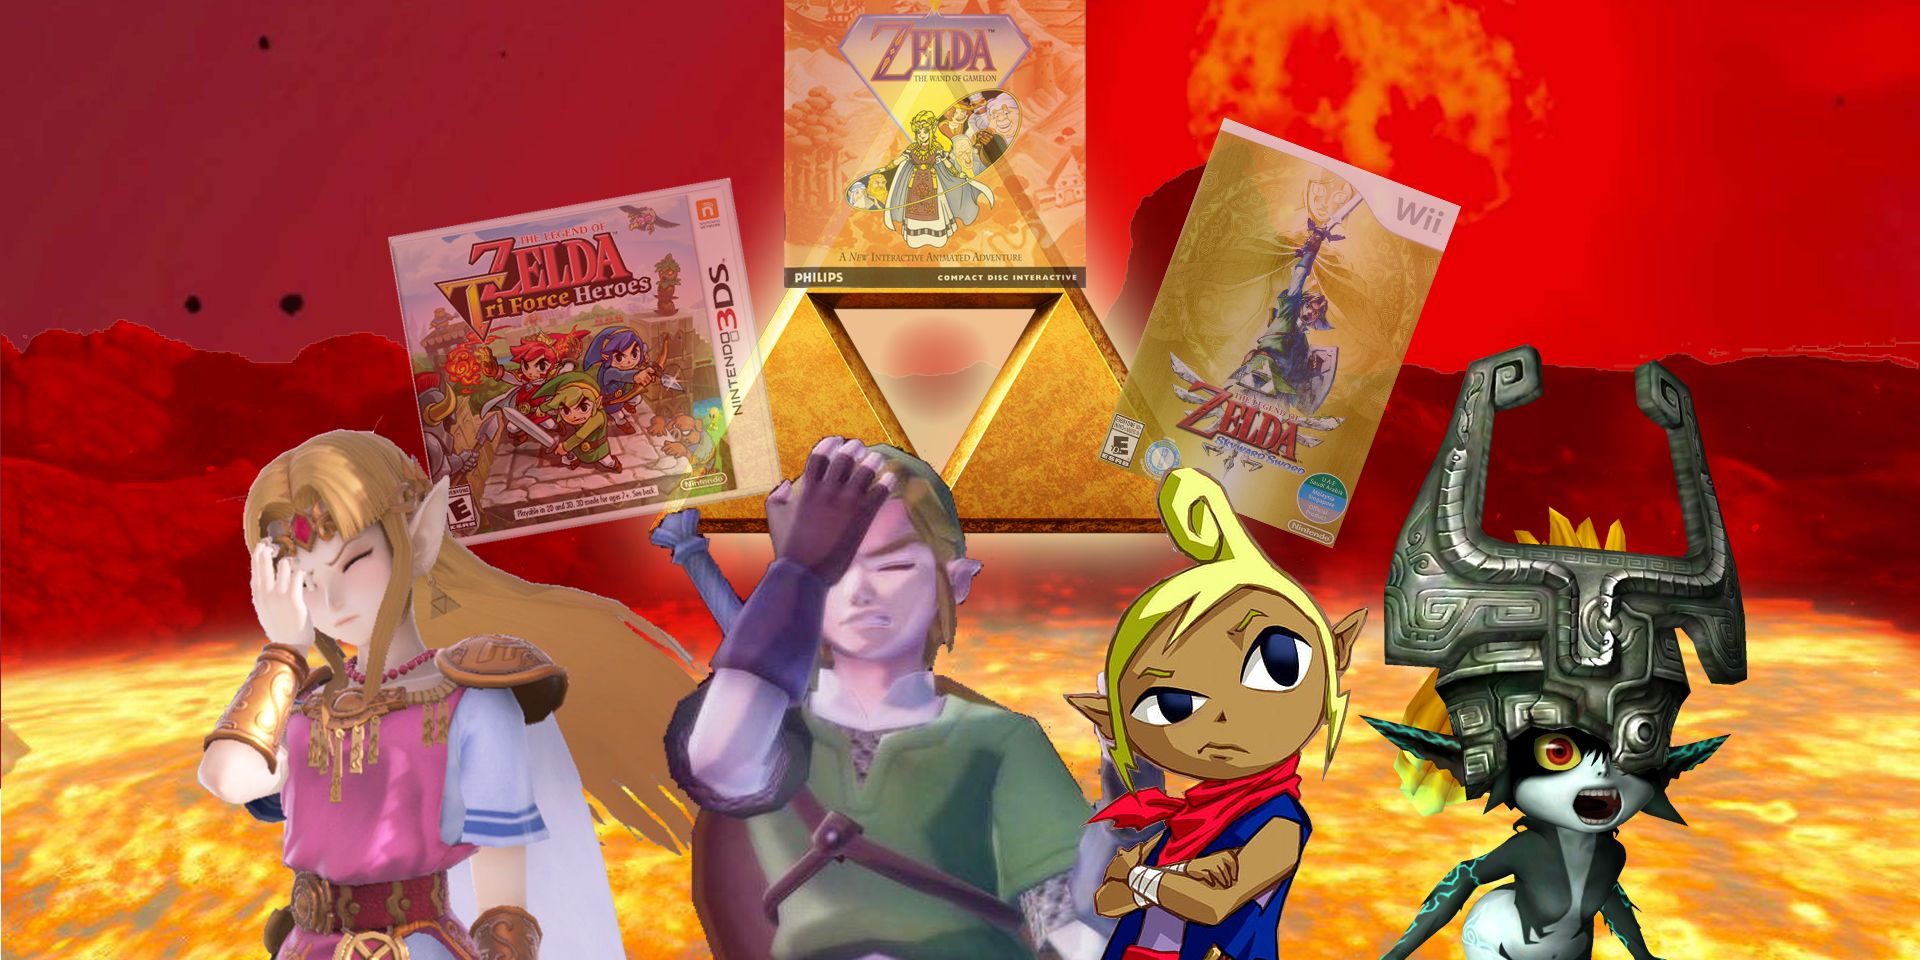 10 Reasons why this is the Greatest Zelda Game Ever Made